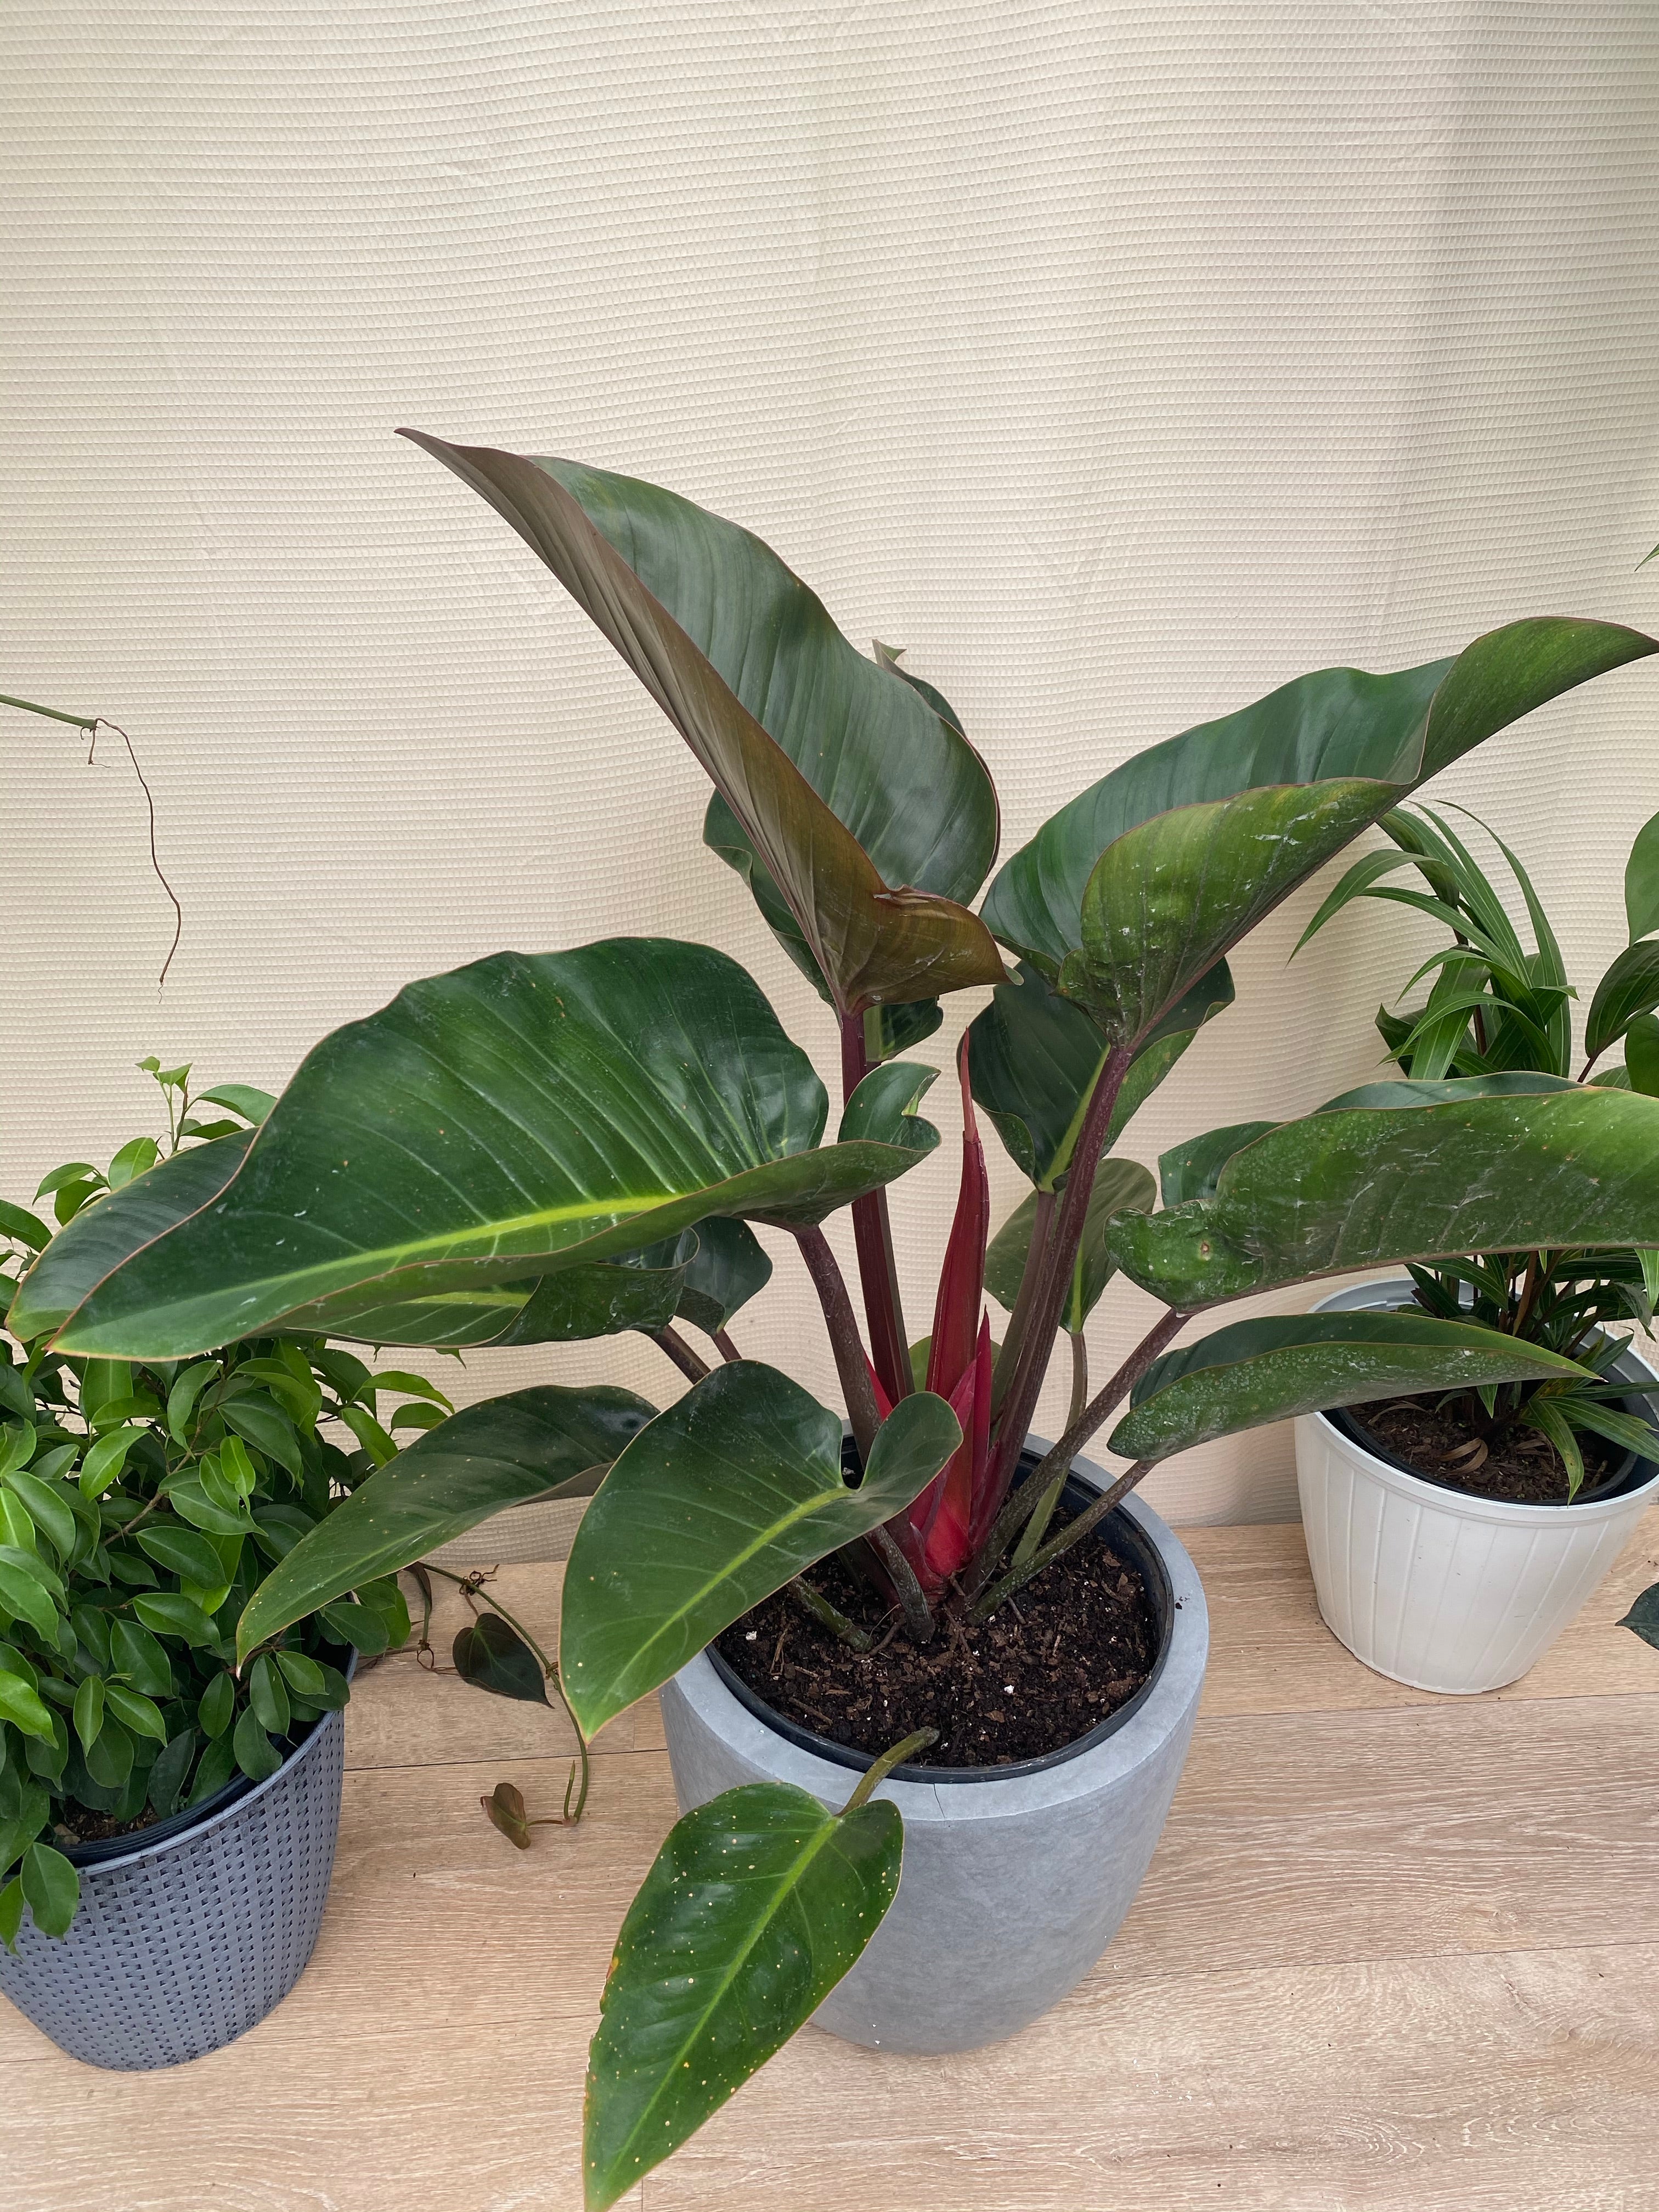 Philodendron Red Congo, Tropical Forest Plant